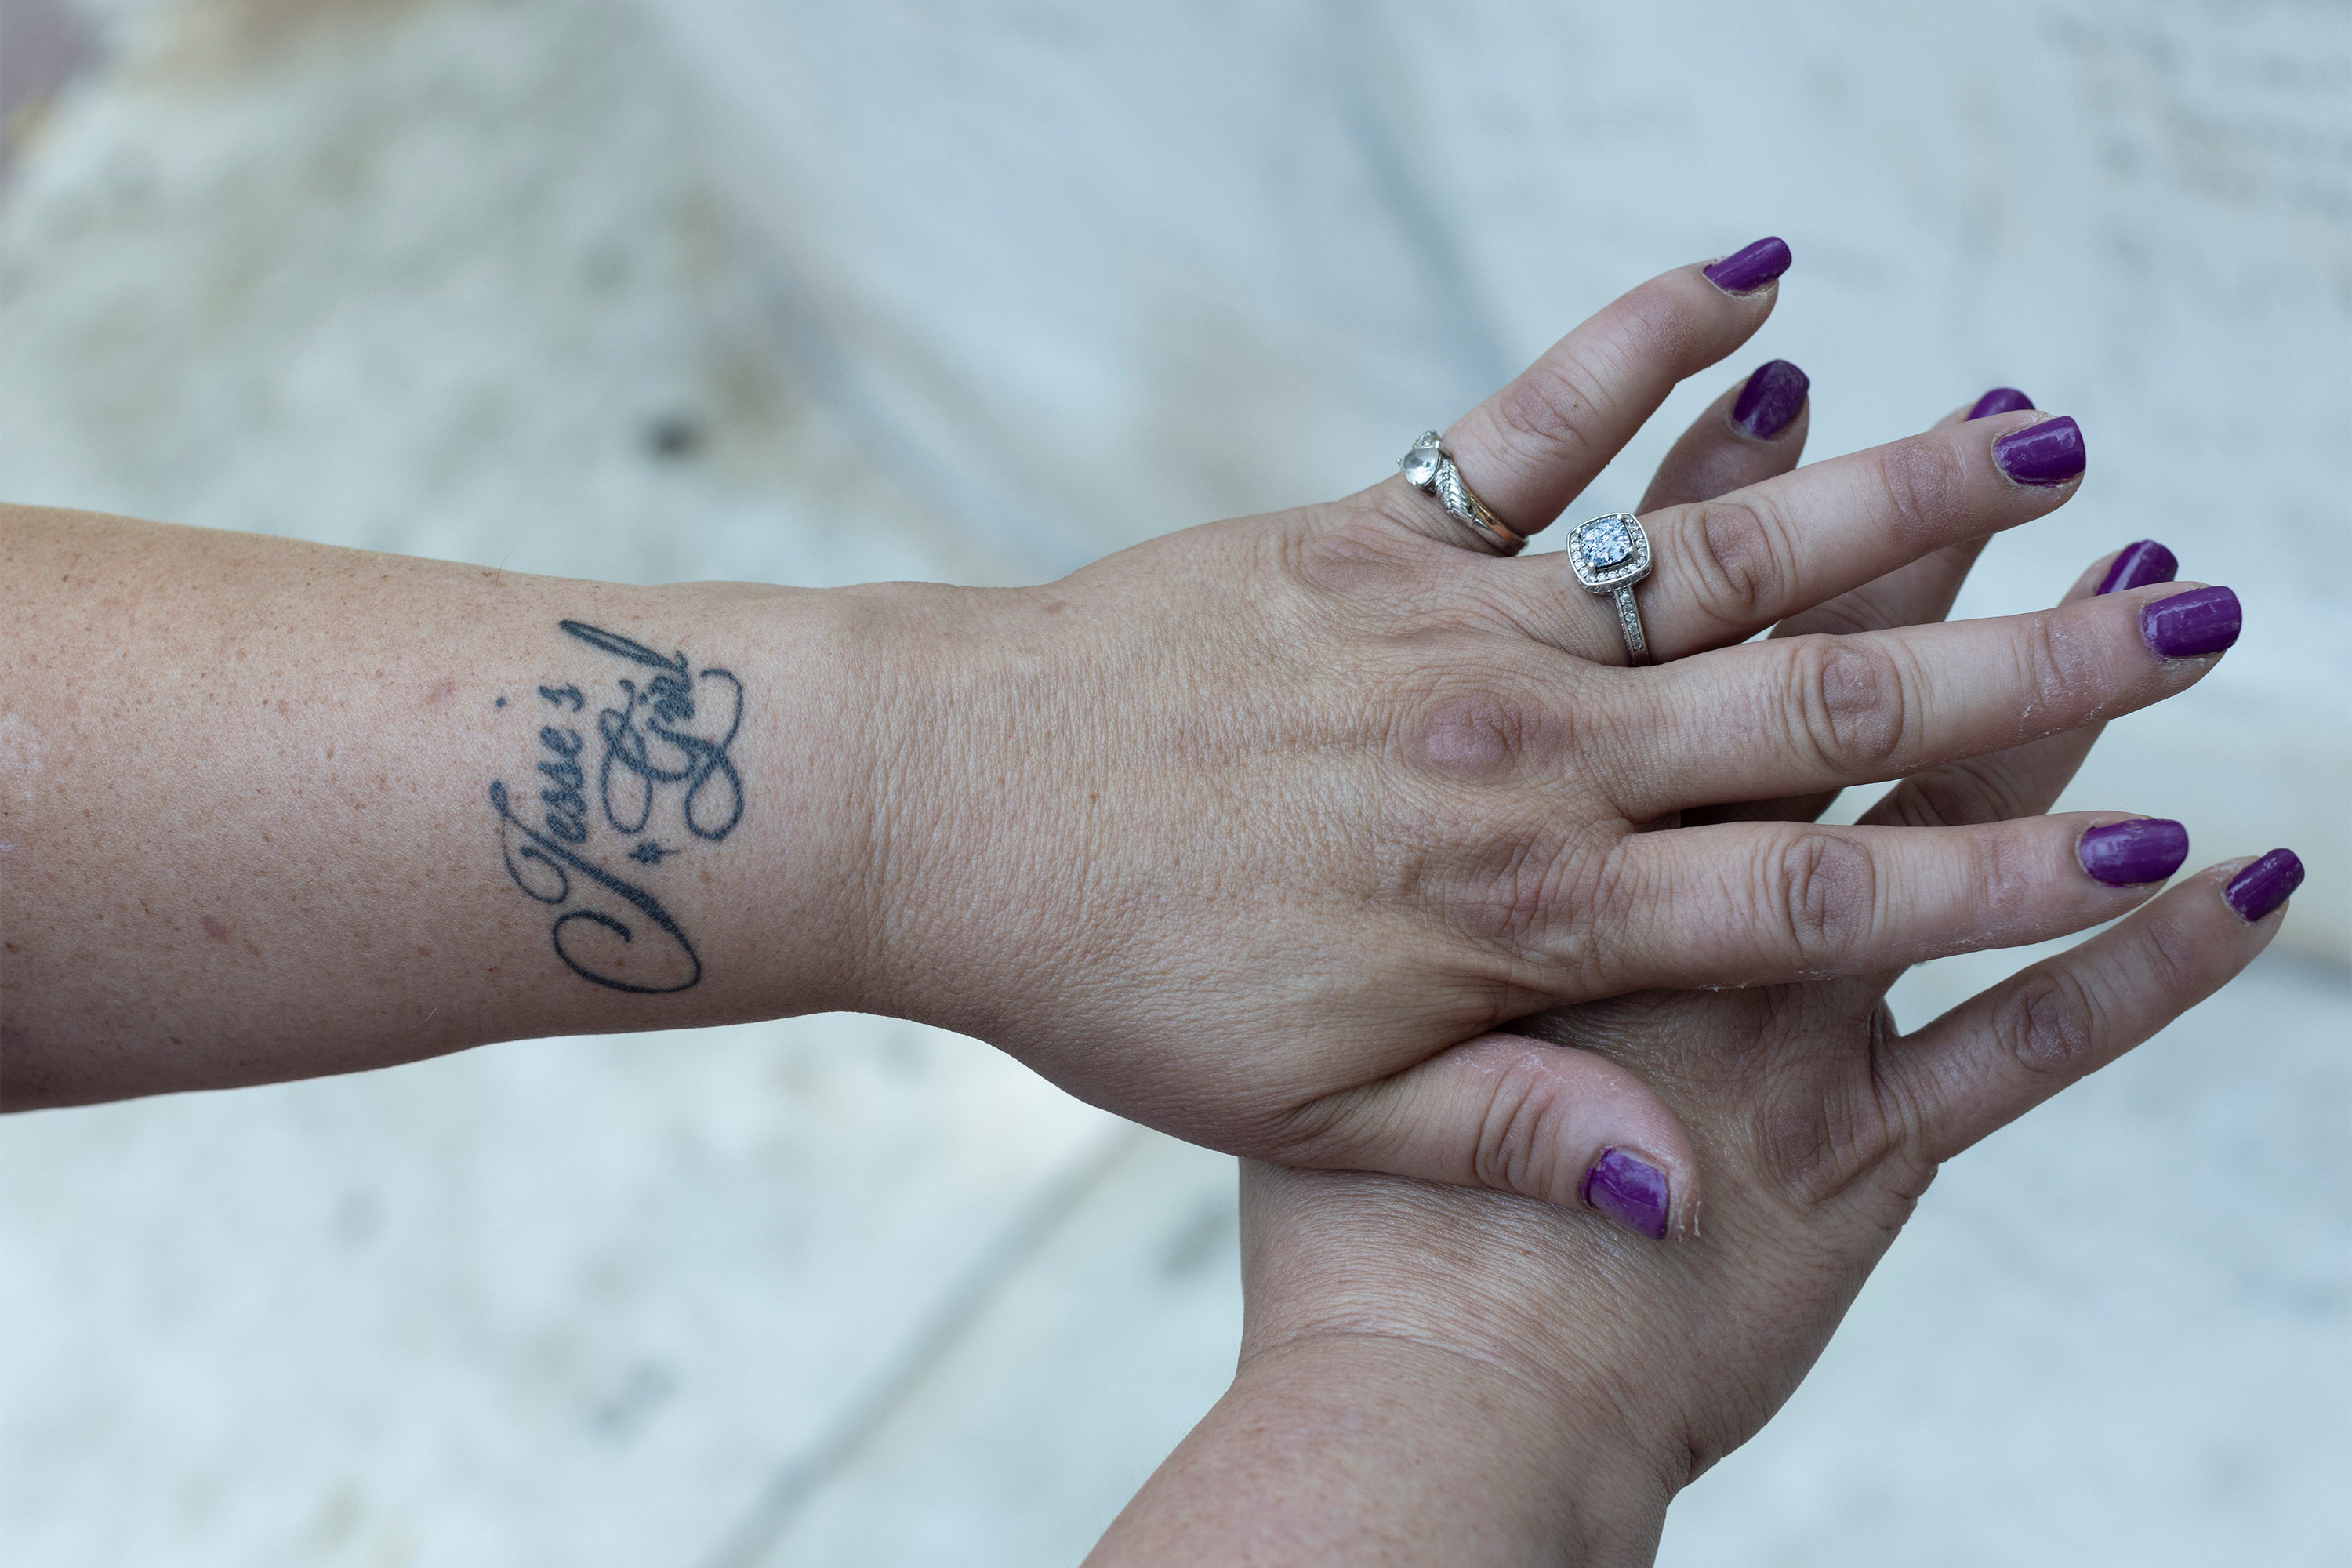 A photo of Sonja Verdugo's hands. She wears rings on her left hand and has a tattoo that reads, "Jesse's girl."